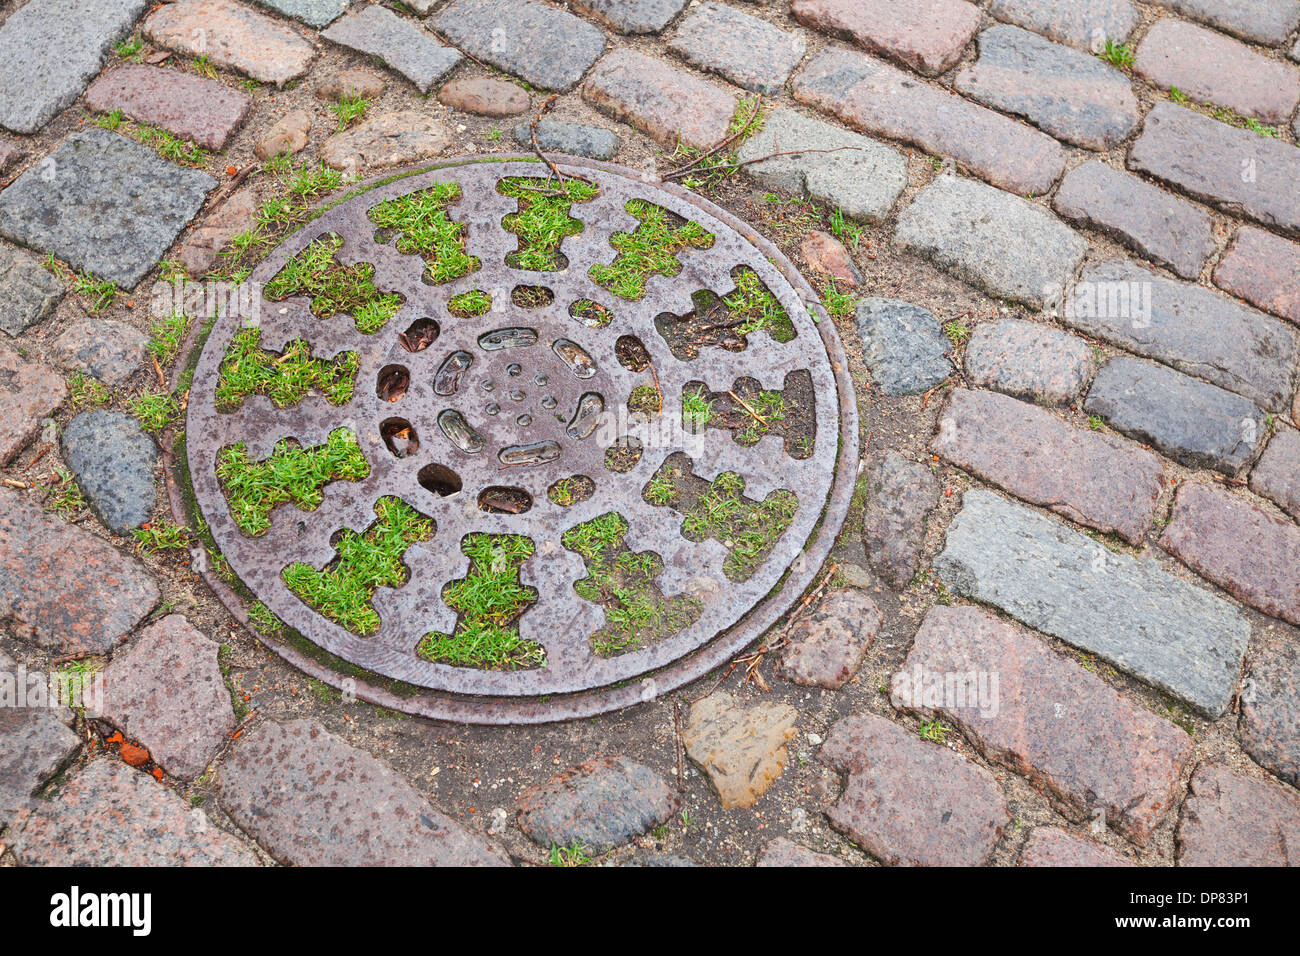 Round sewer manhole on stone pavement with green grass inside Stock Photo